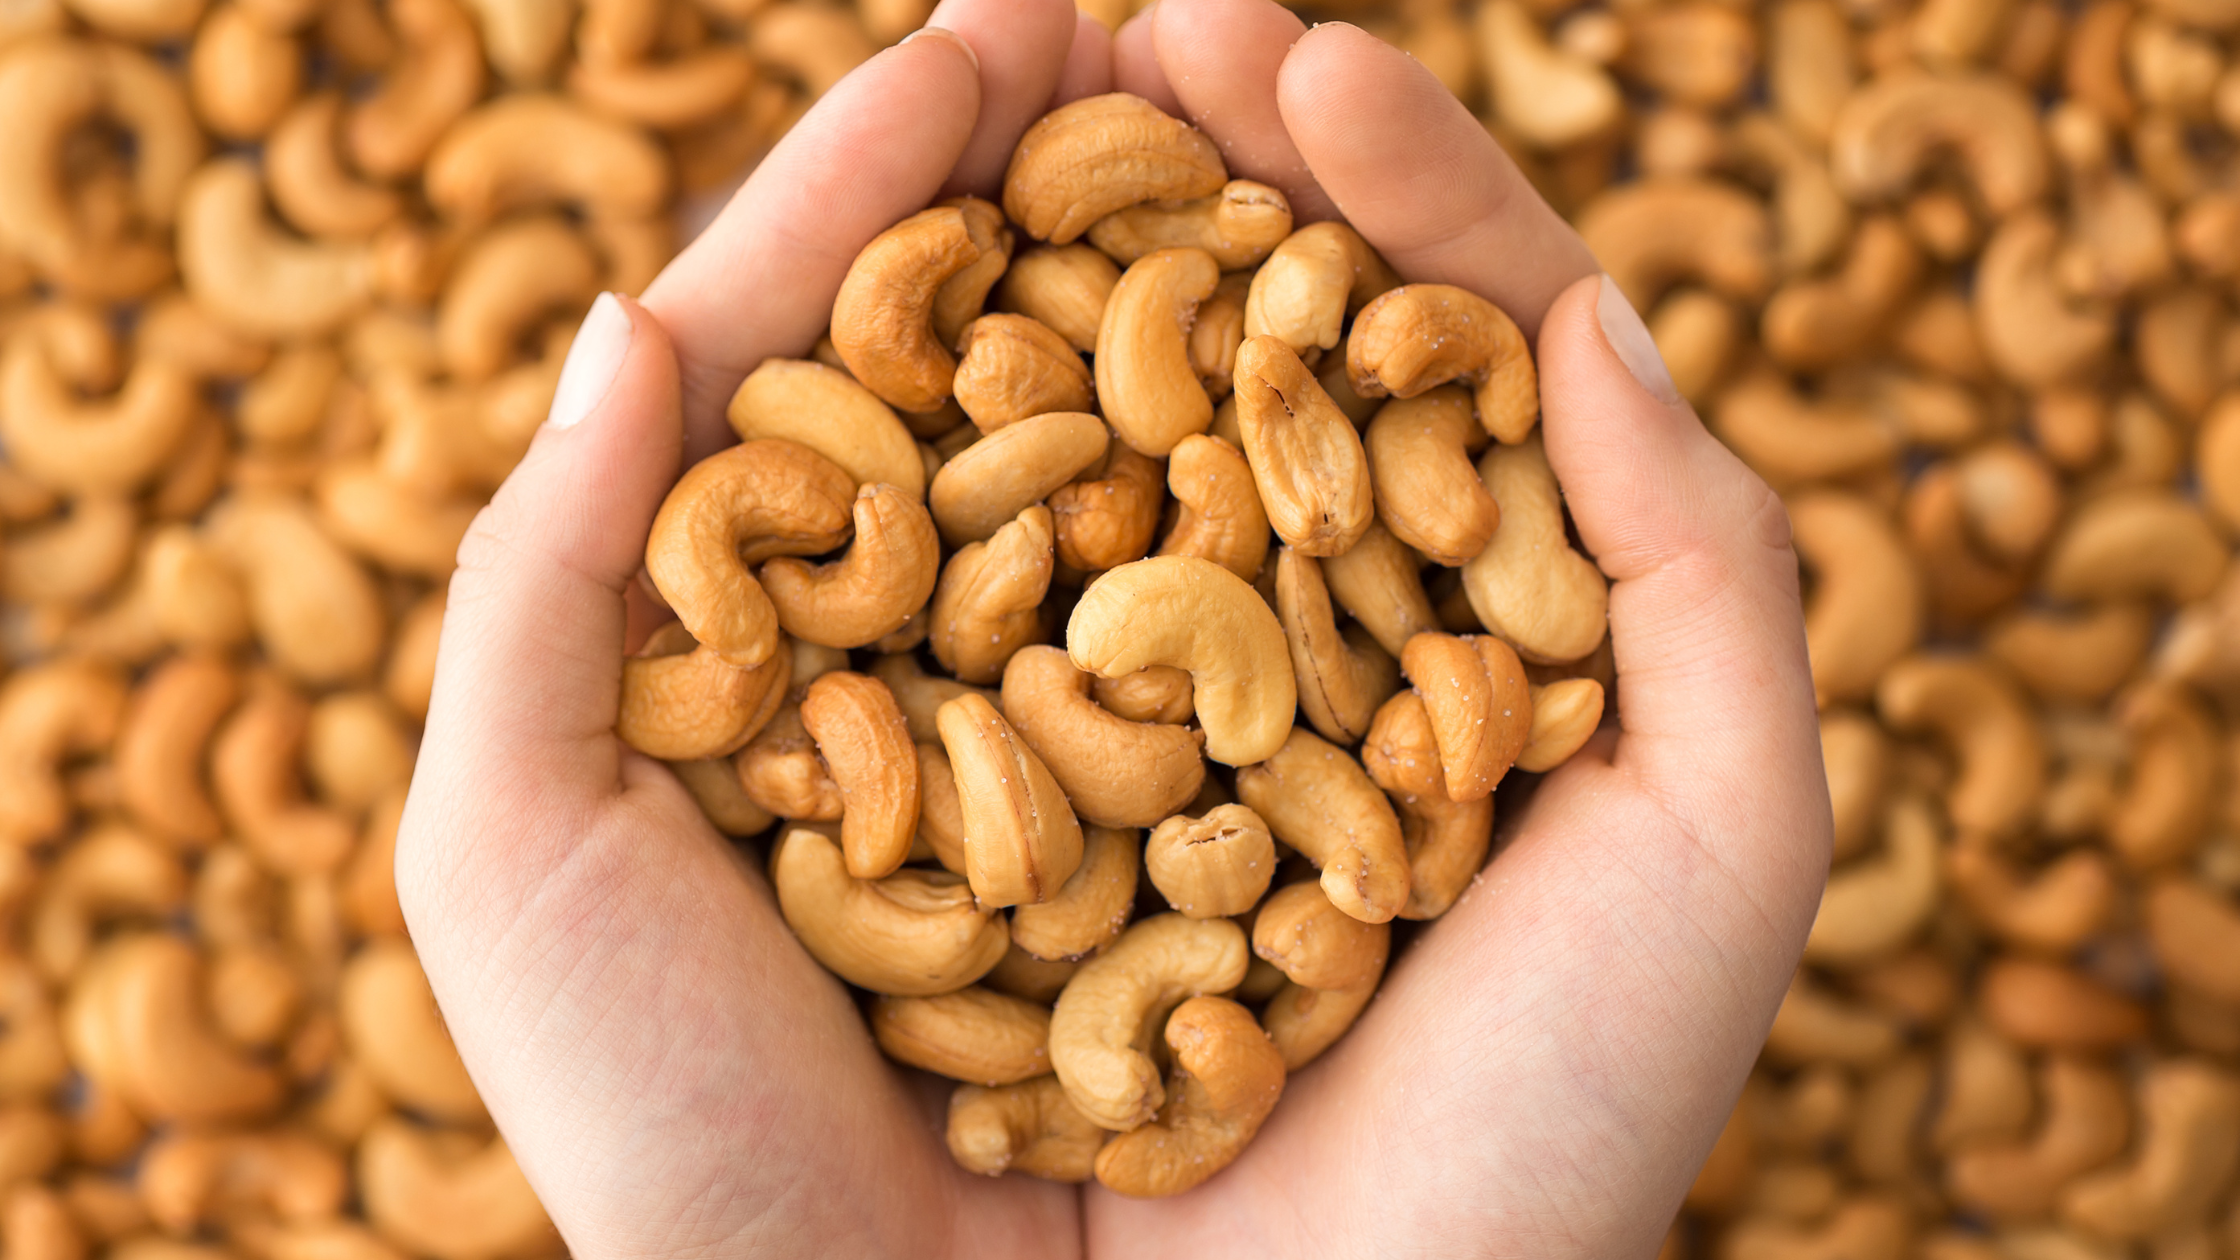 A Comprehensive Breakdown On the Health Benefits of Cashews